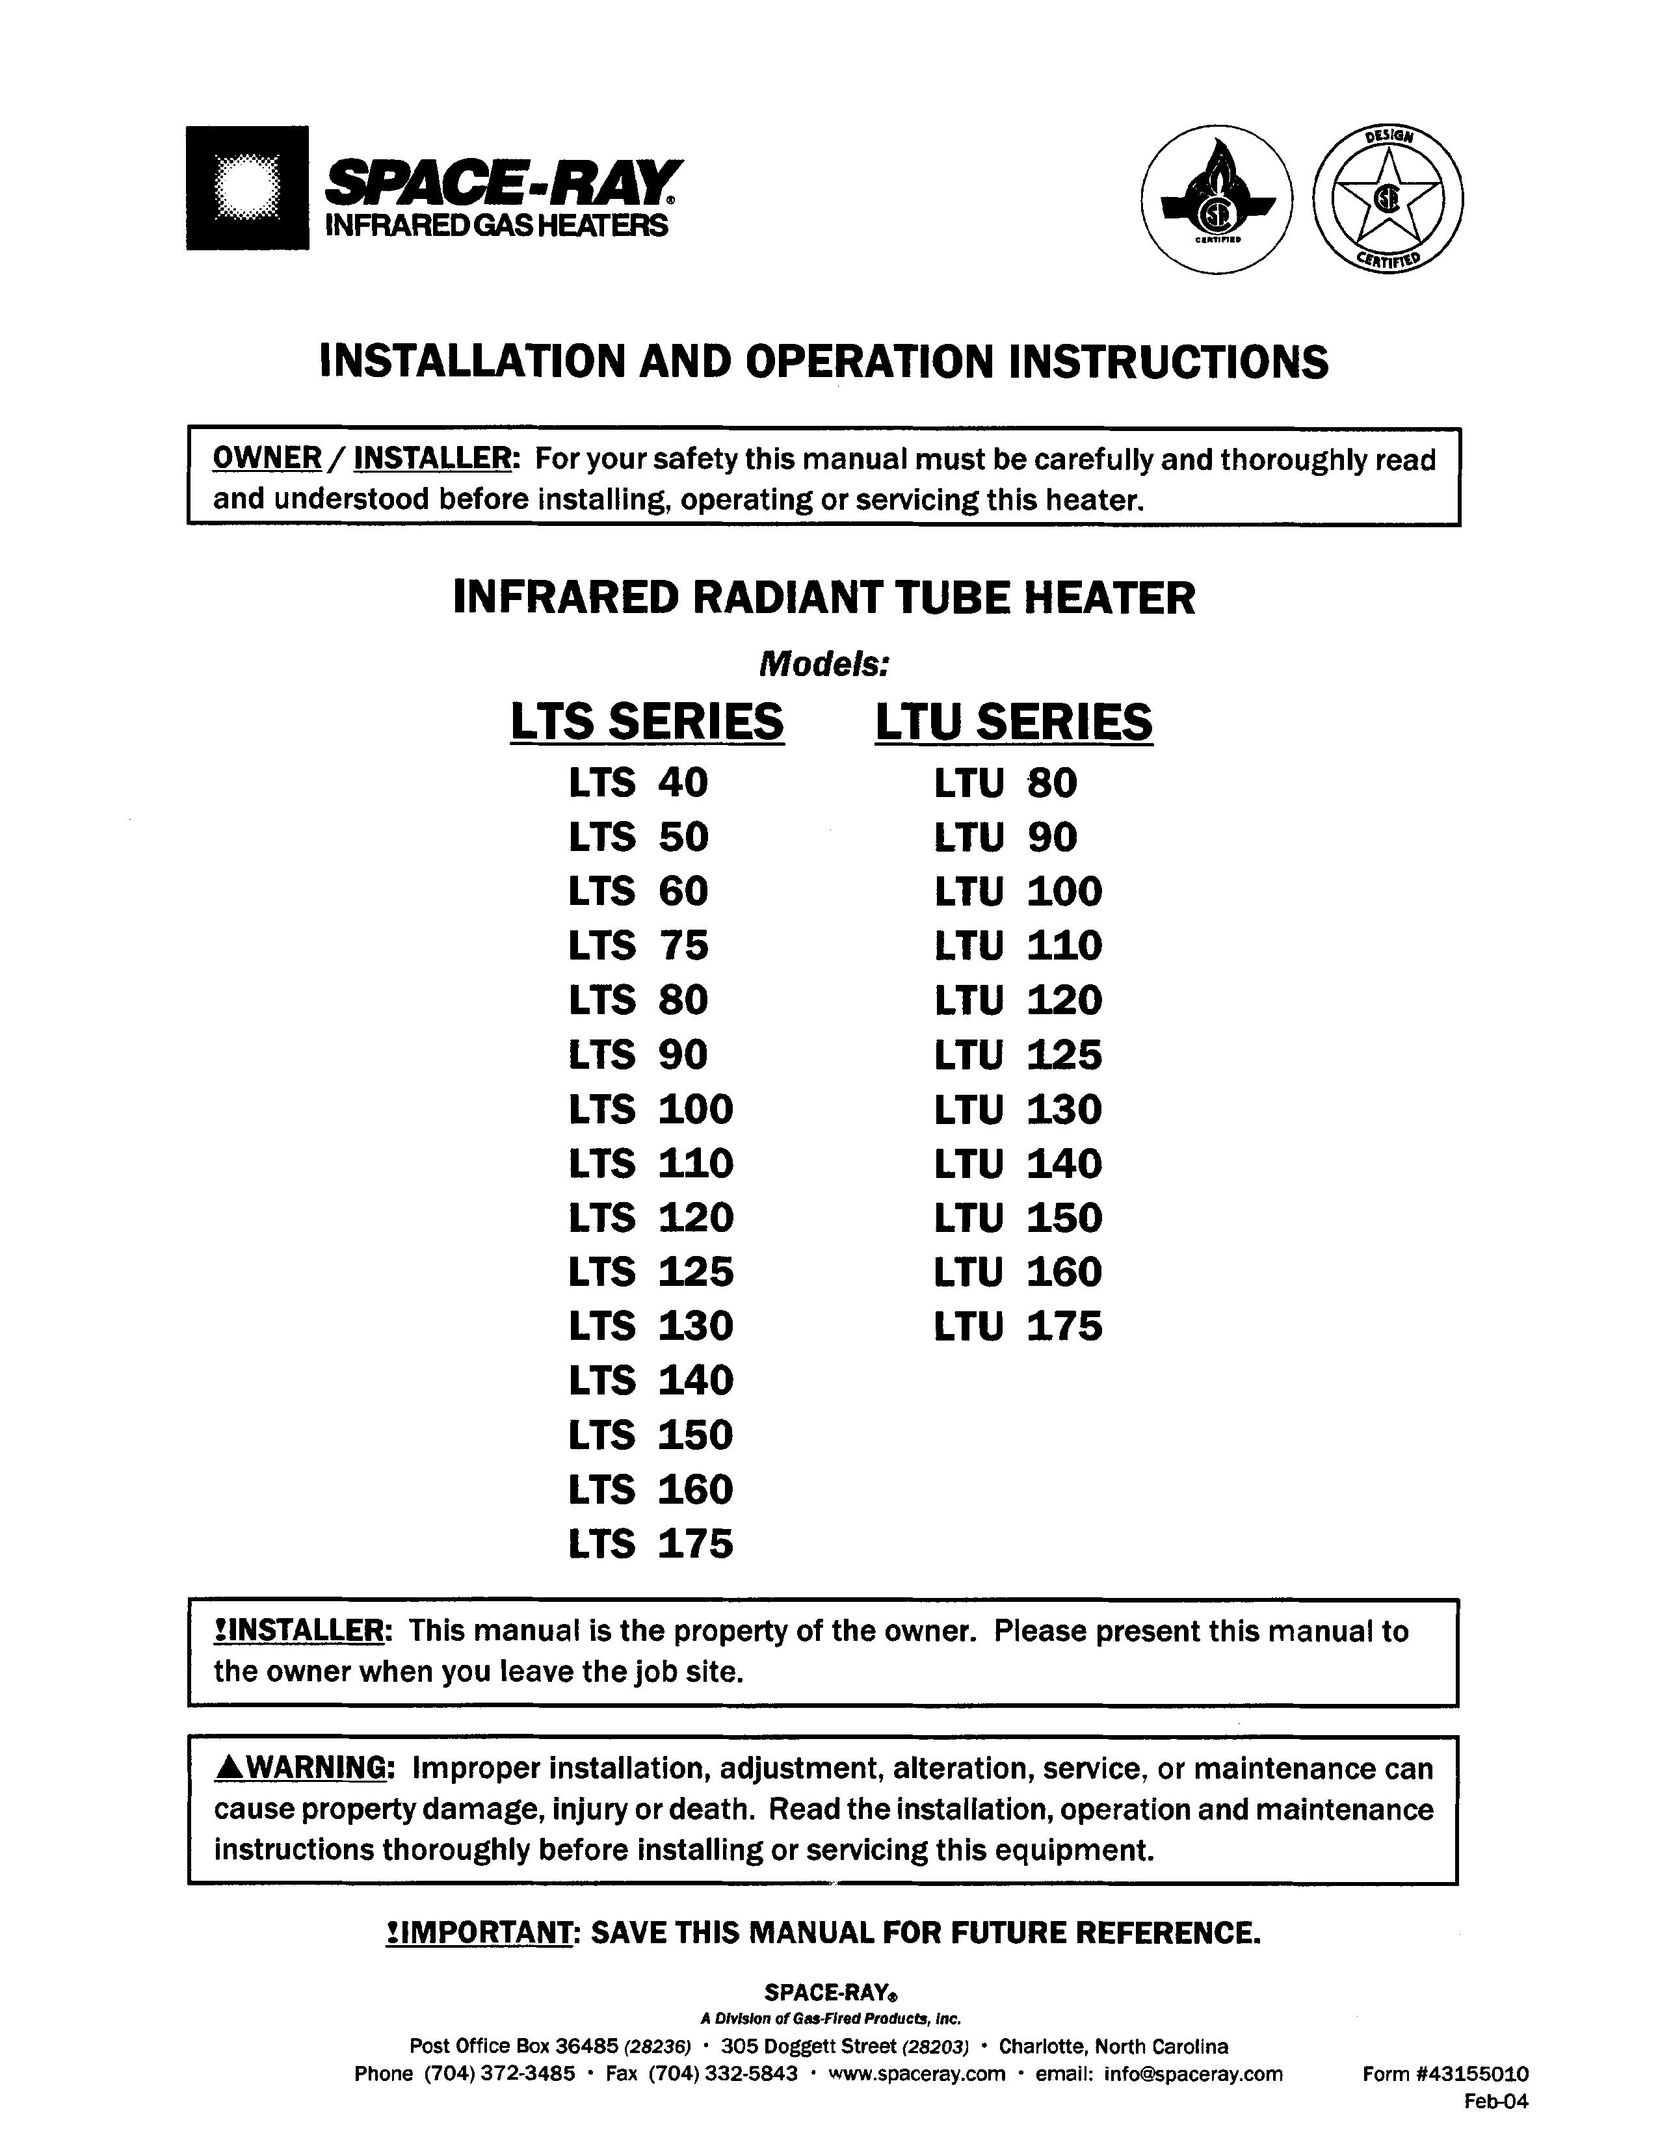 Gas-Fired Products LTS 175 Electric Heater User Manual